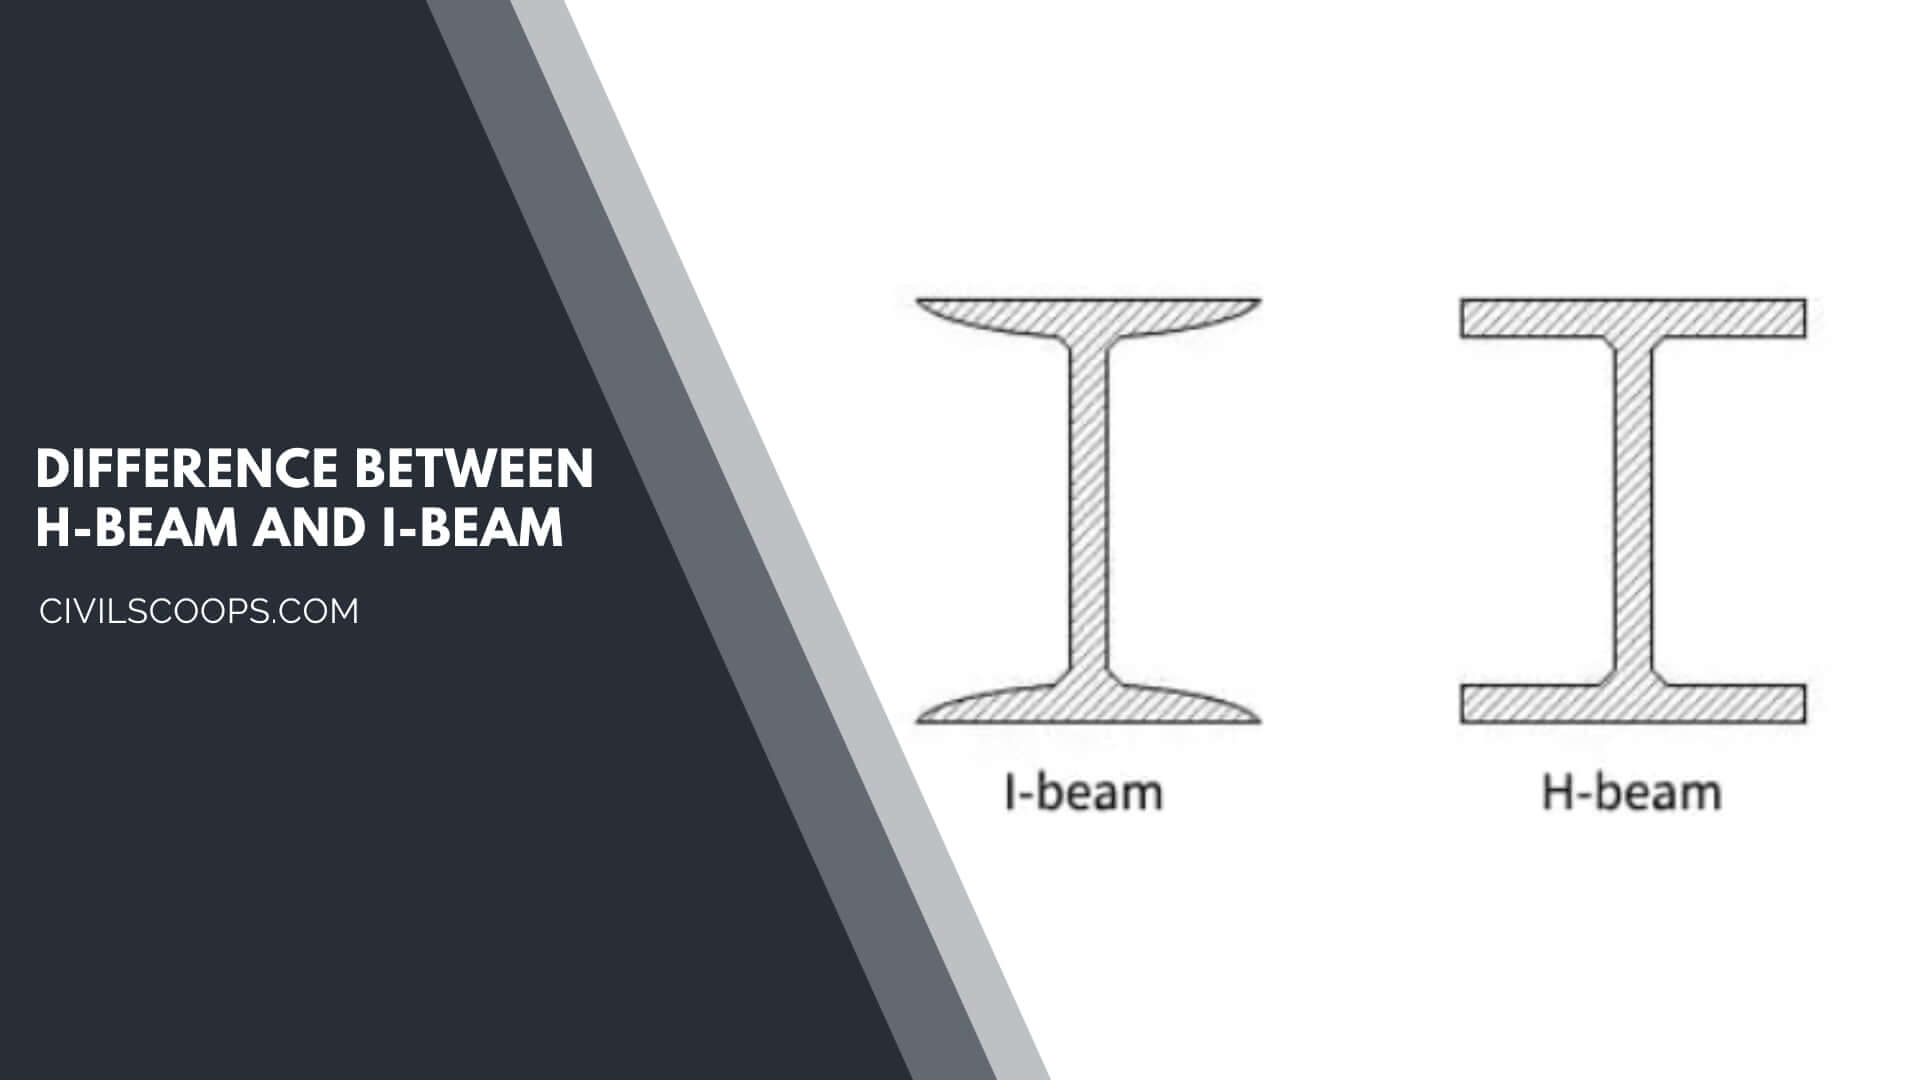 Difference Between H-Beam and I-Beam